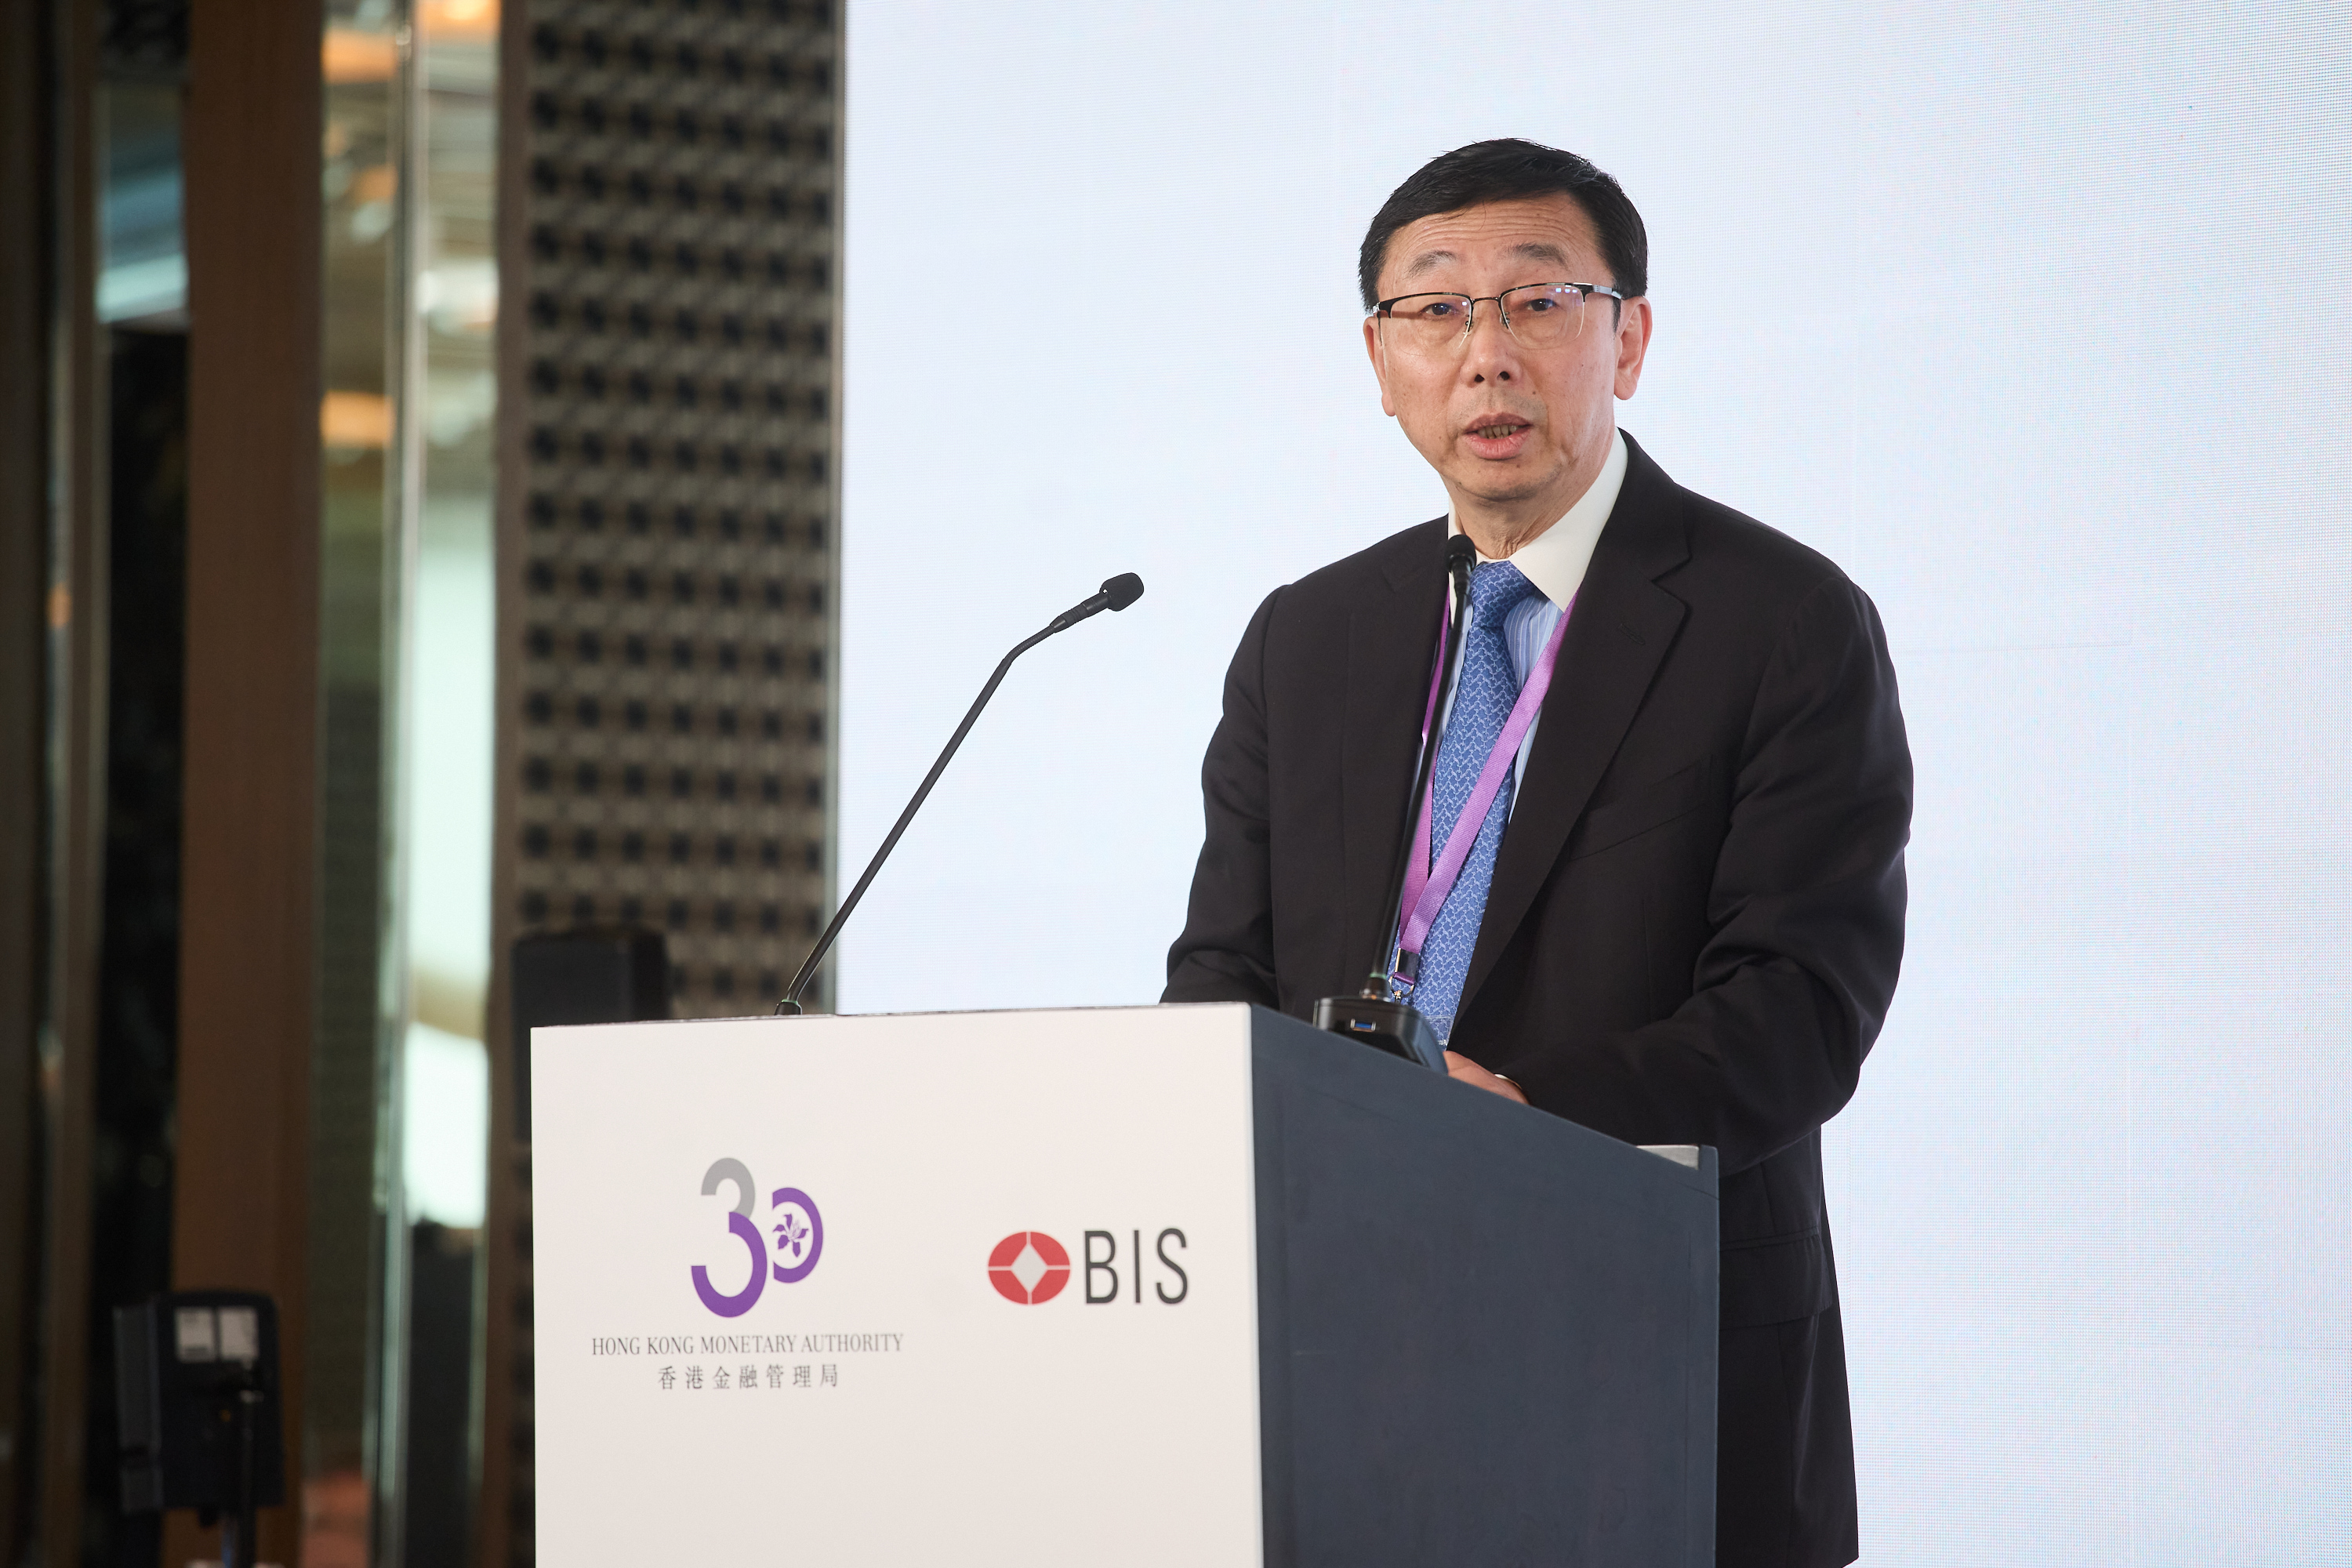 Mr Tao Zhang, Chief Representative of the Bank for international Settlements representative office for Asia and the Pacific, delivers closing remarks.